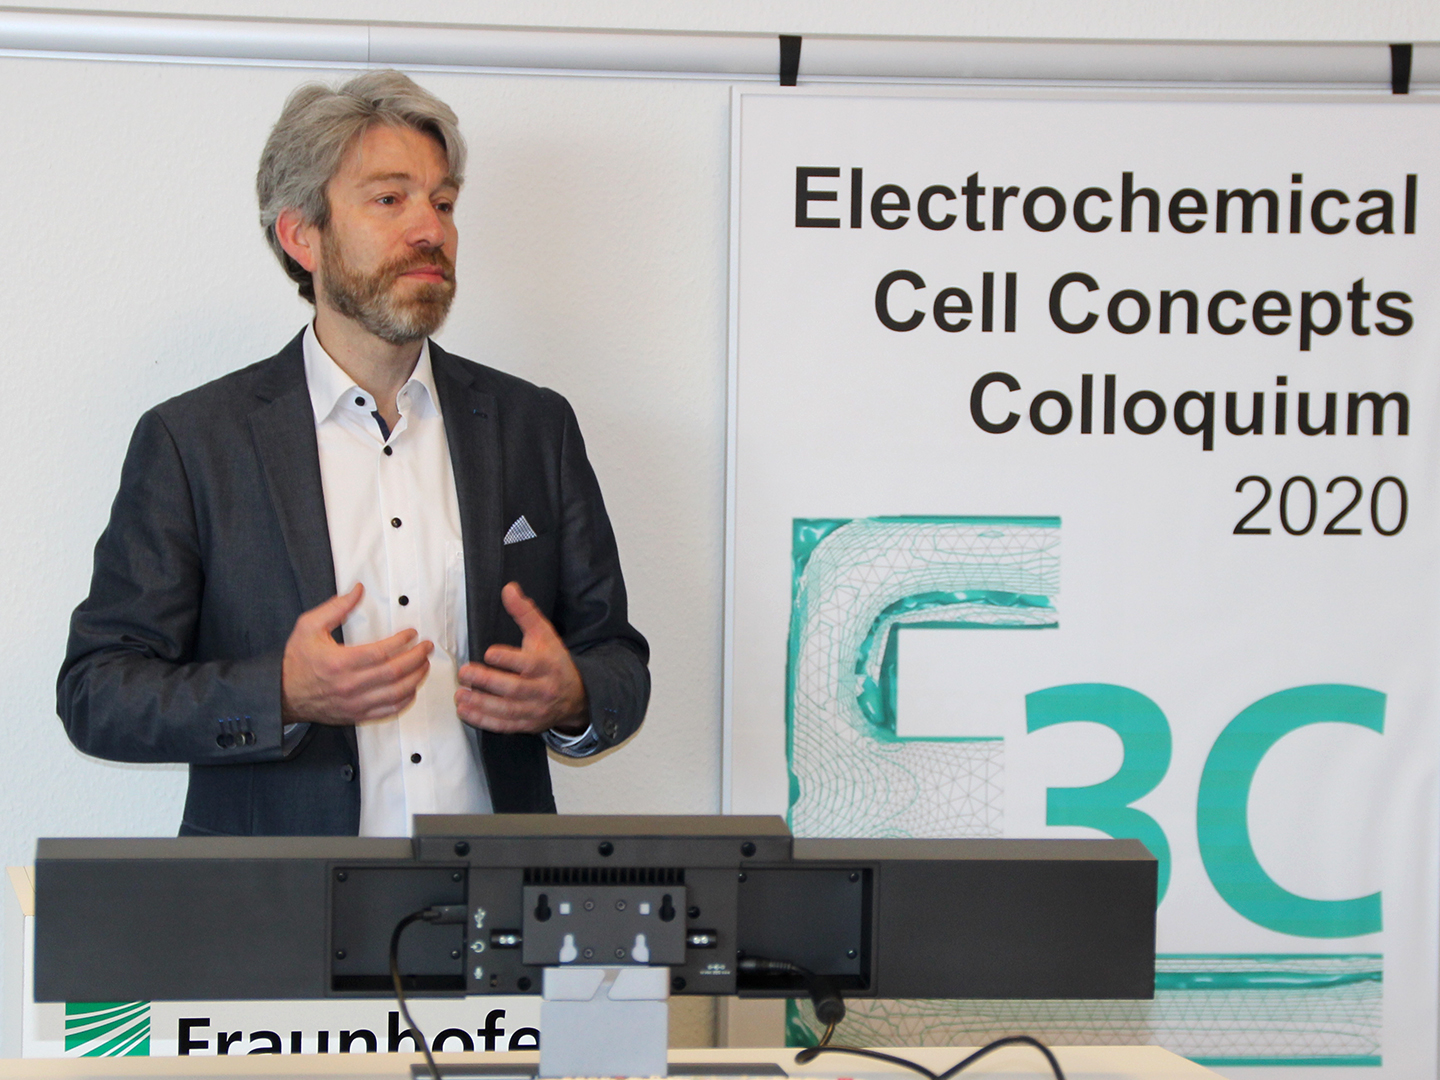 Prof. Christian Doetsch, head of the energy department at Fraunhofer UMSICHT, welcomed the participants of the virtual &quot;Electrochemical Cell Concepts Colloquium&quot;.